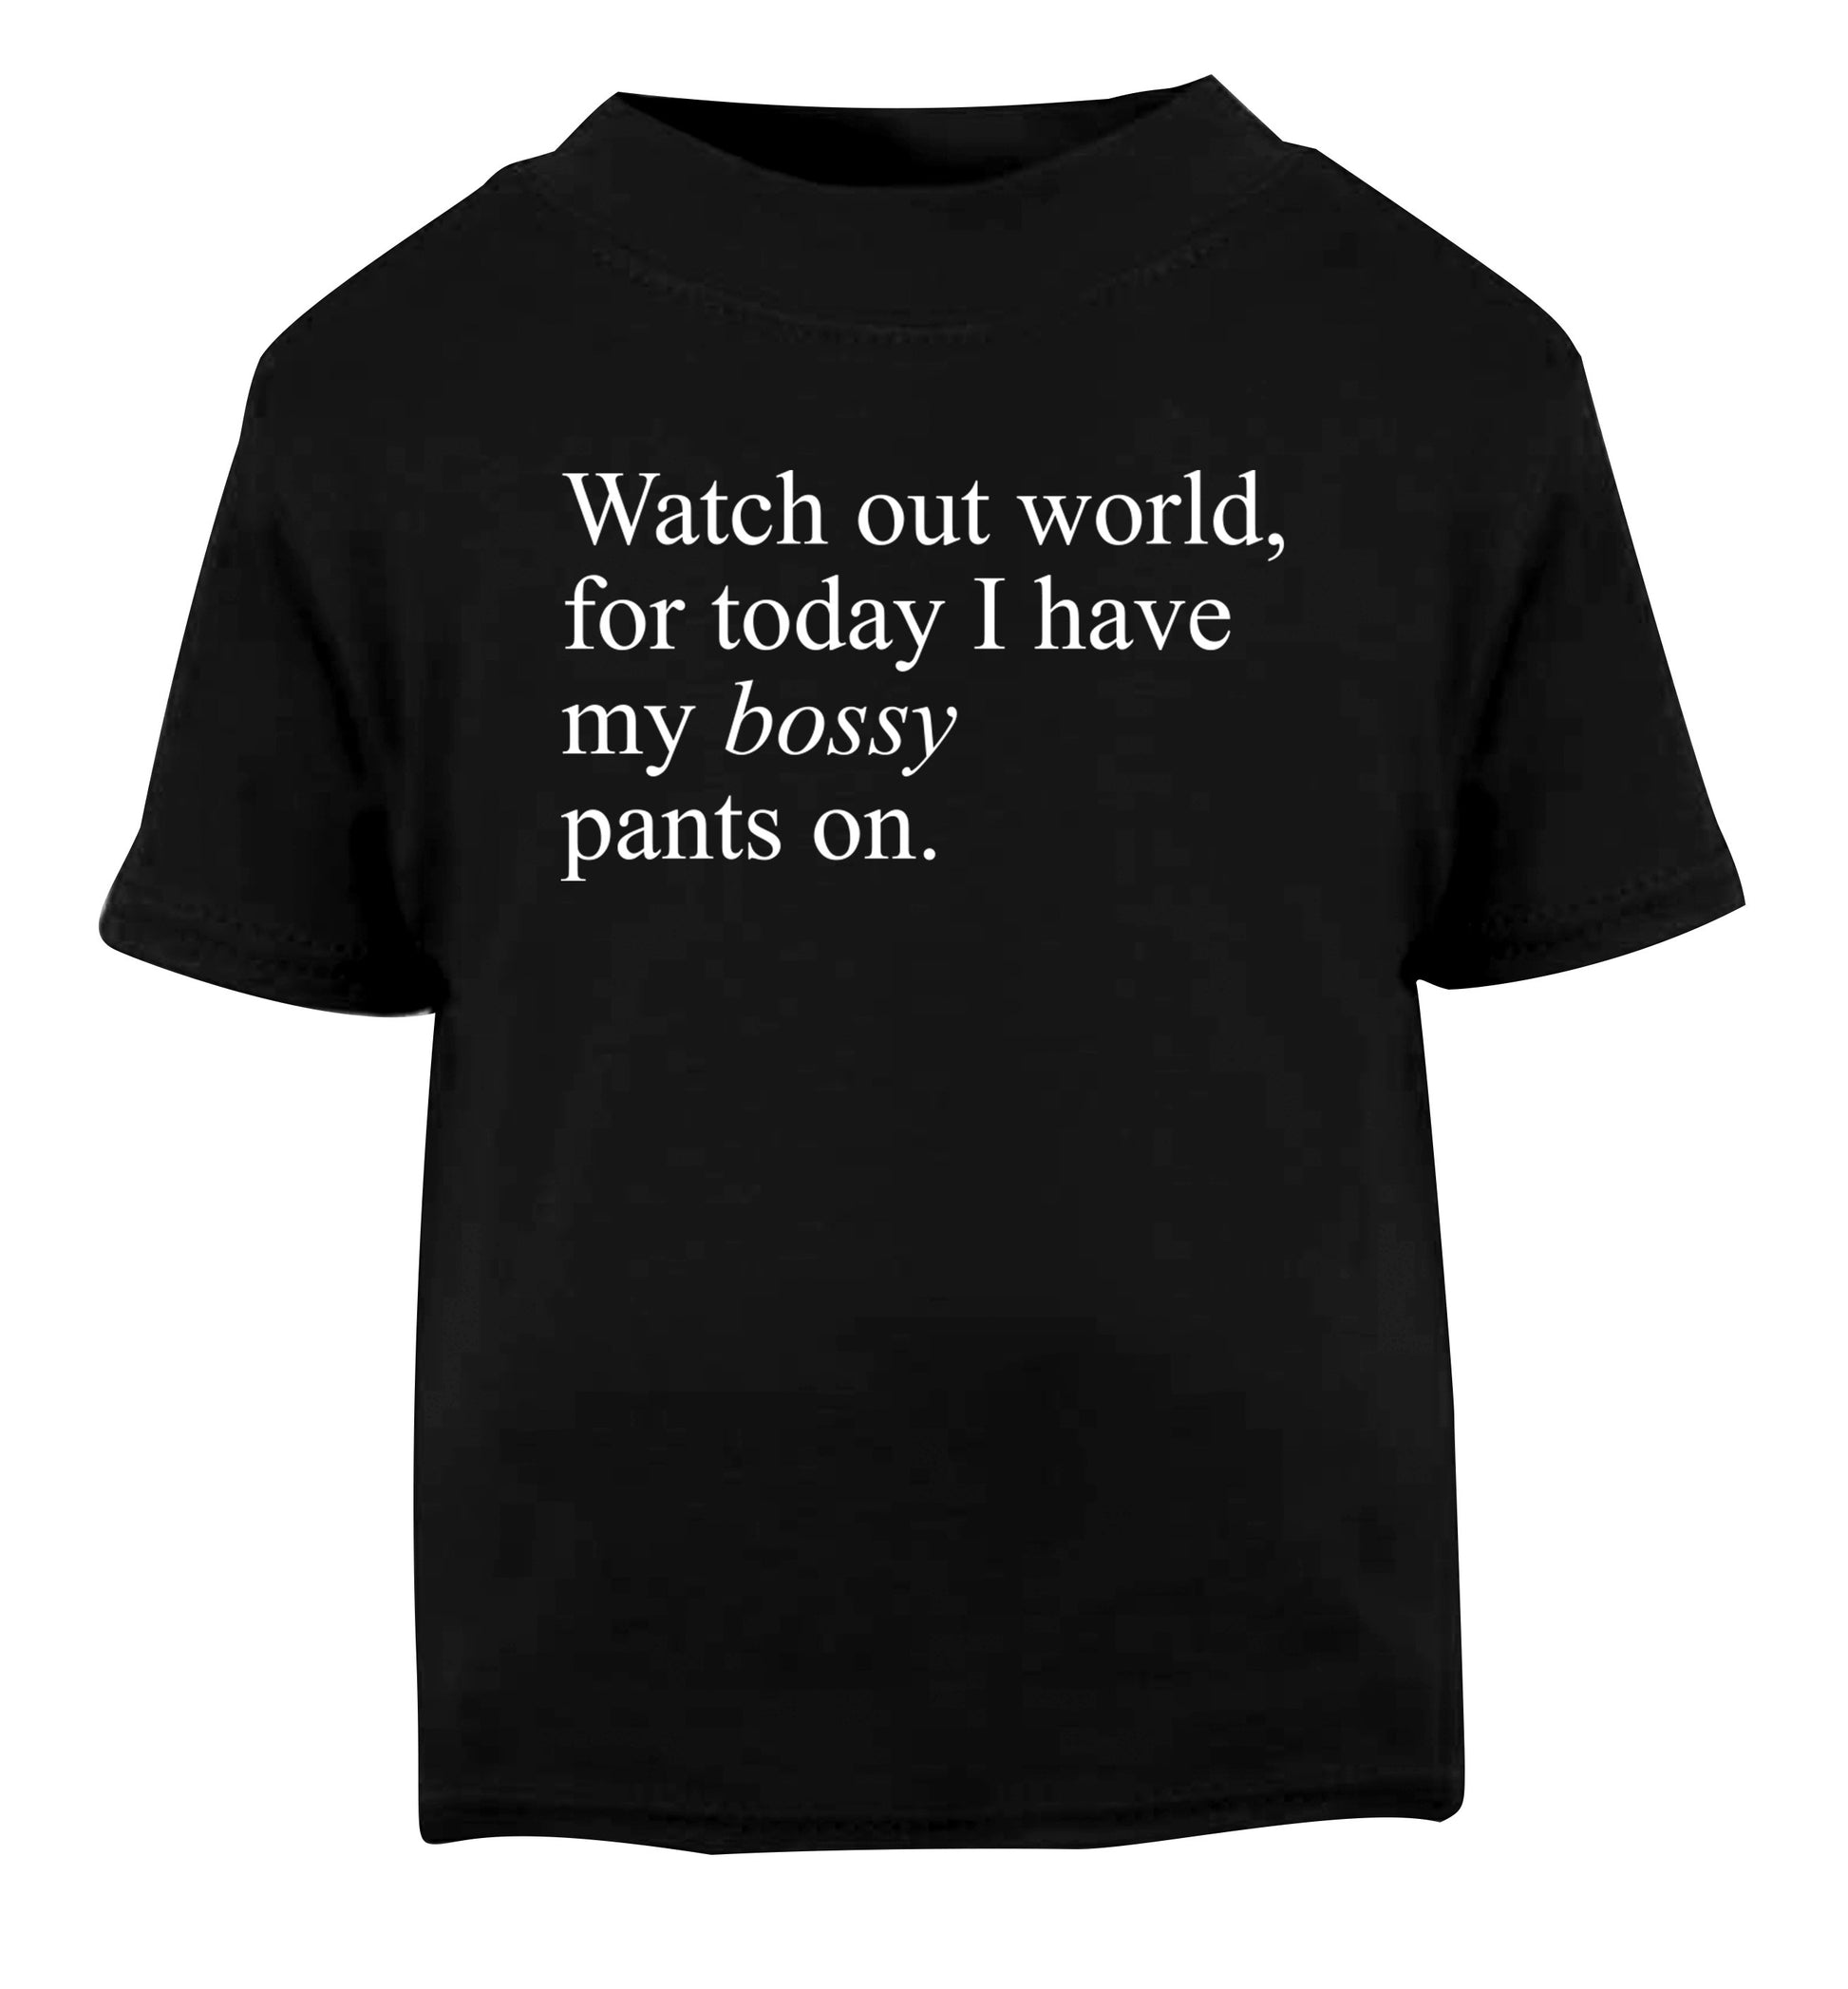 Watch out world, for today I have my bossy pants on Black Baby Toddler Tshirt 2 years